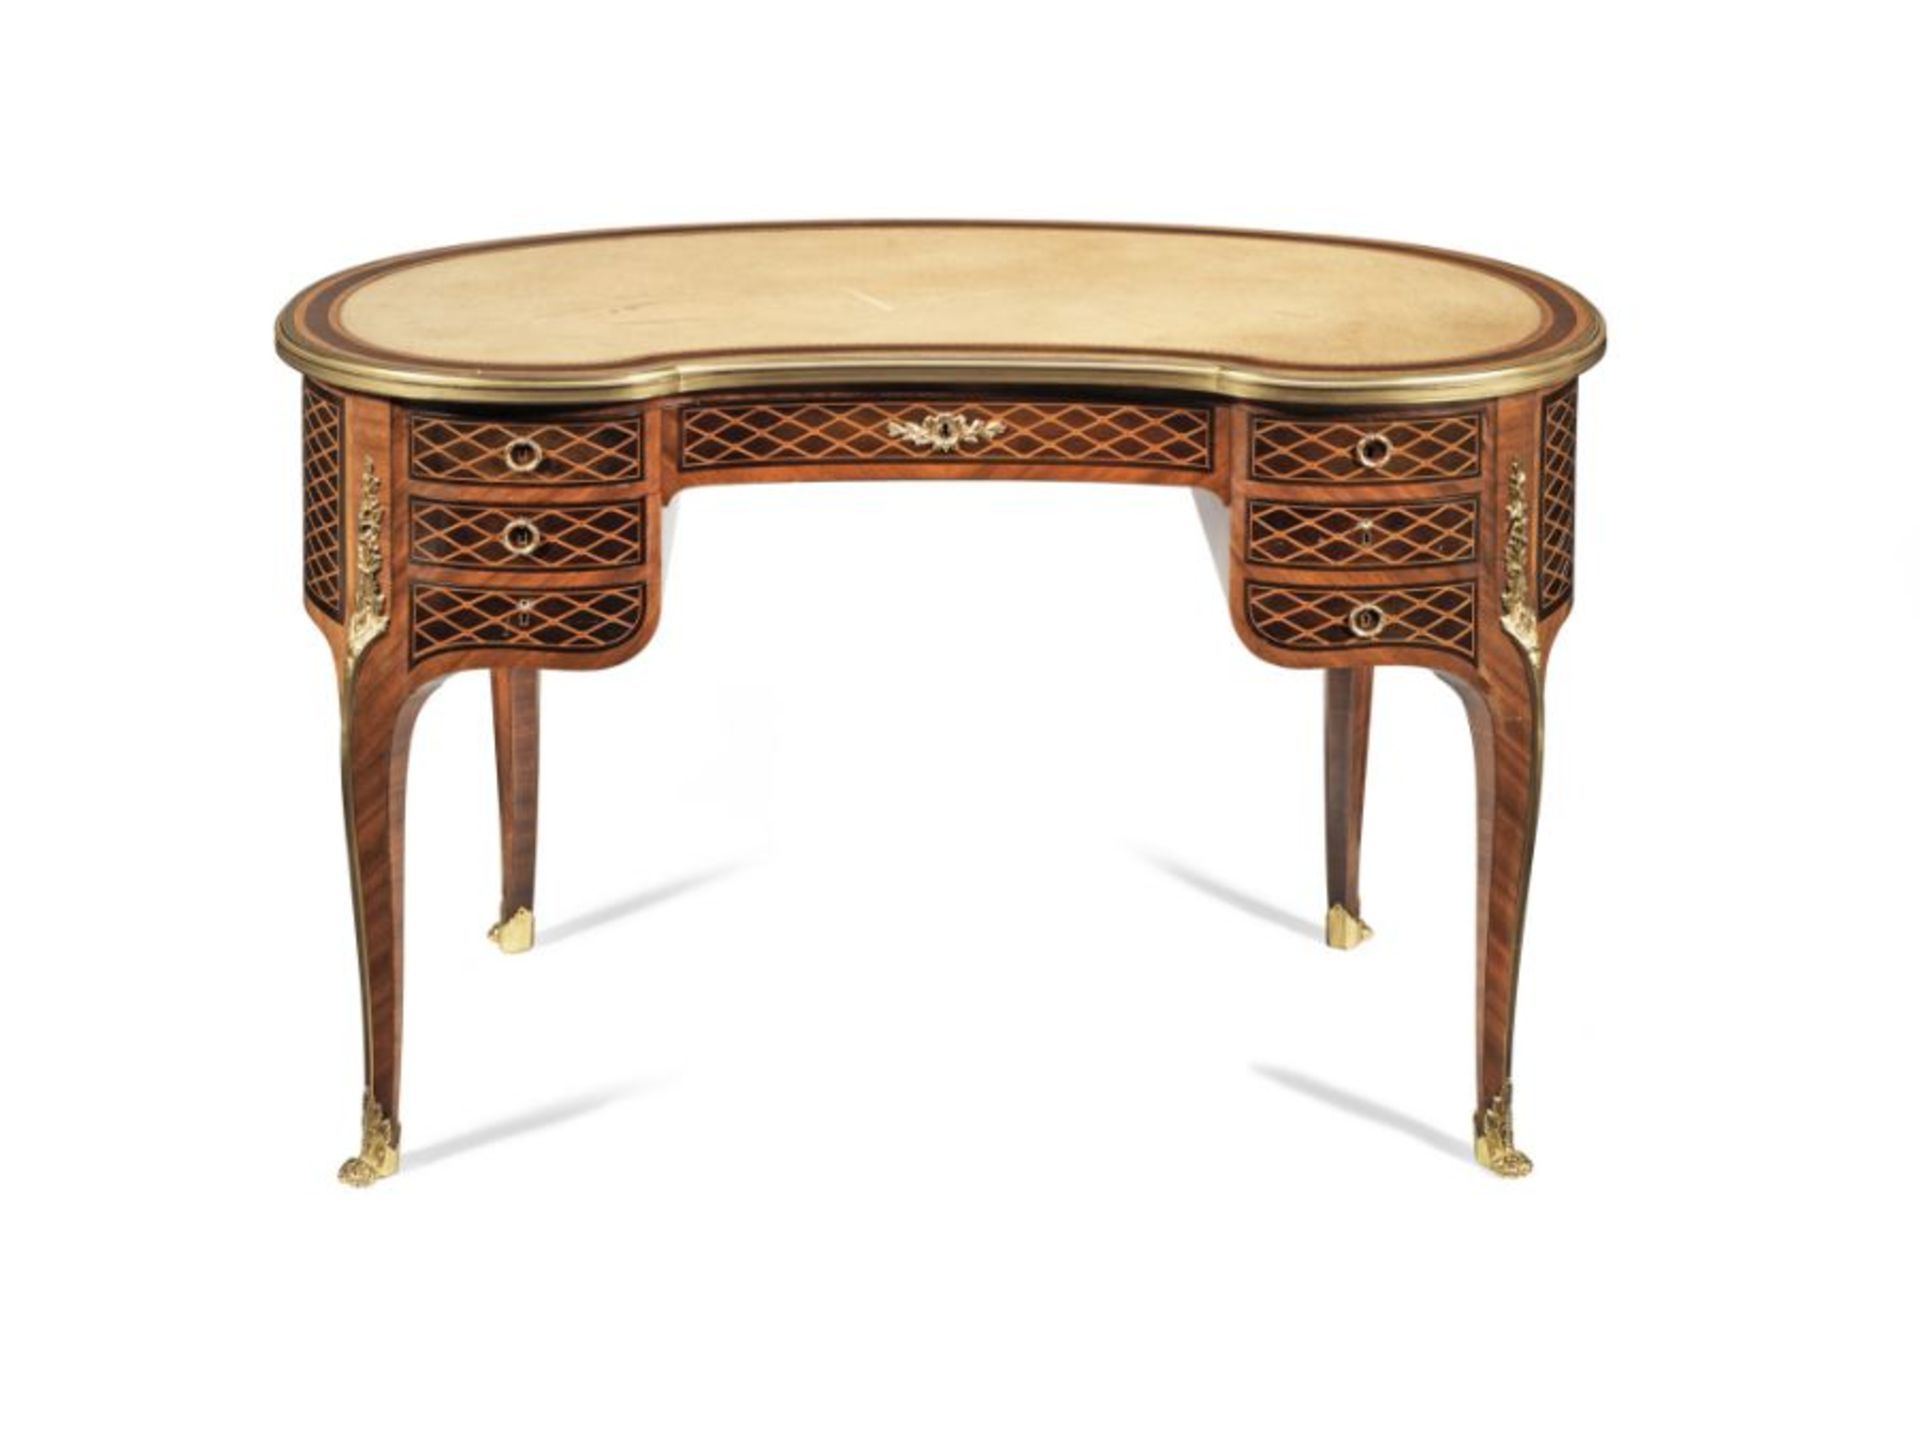 A late 19th century Louis XVI style mahogany and parquetry table à ecrire, by Paul Sormani, Paris